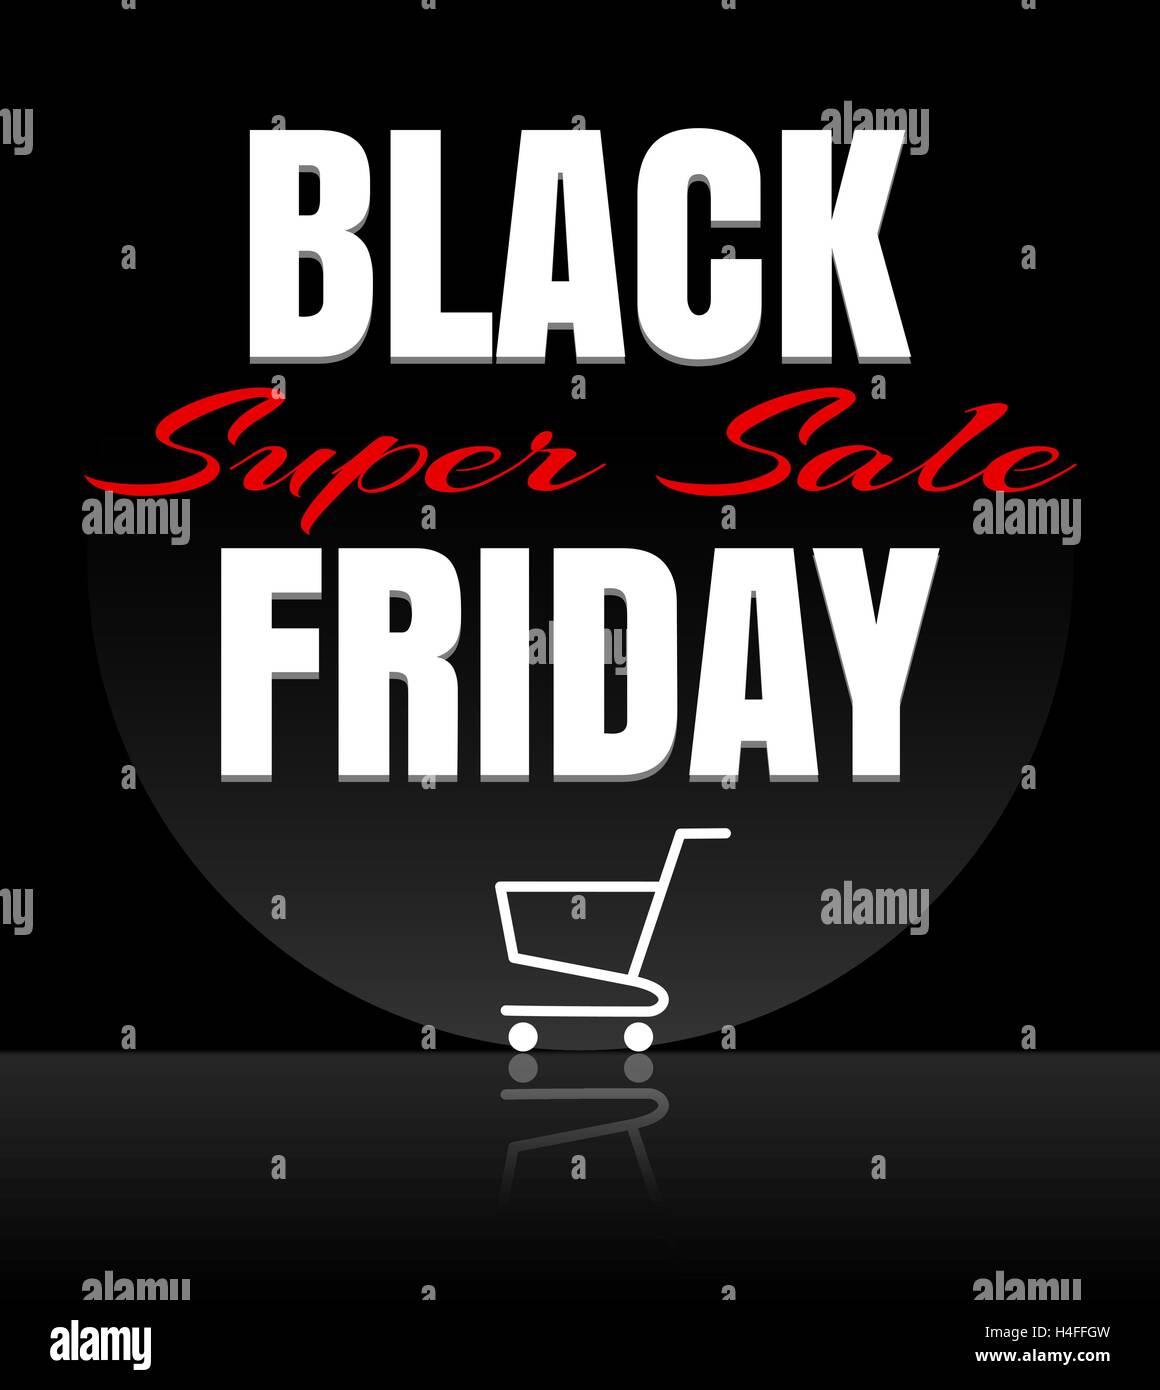 Black Friday sale design template. Black Friday banner with shopping